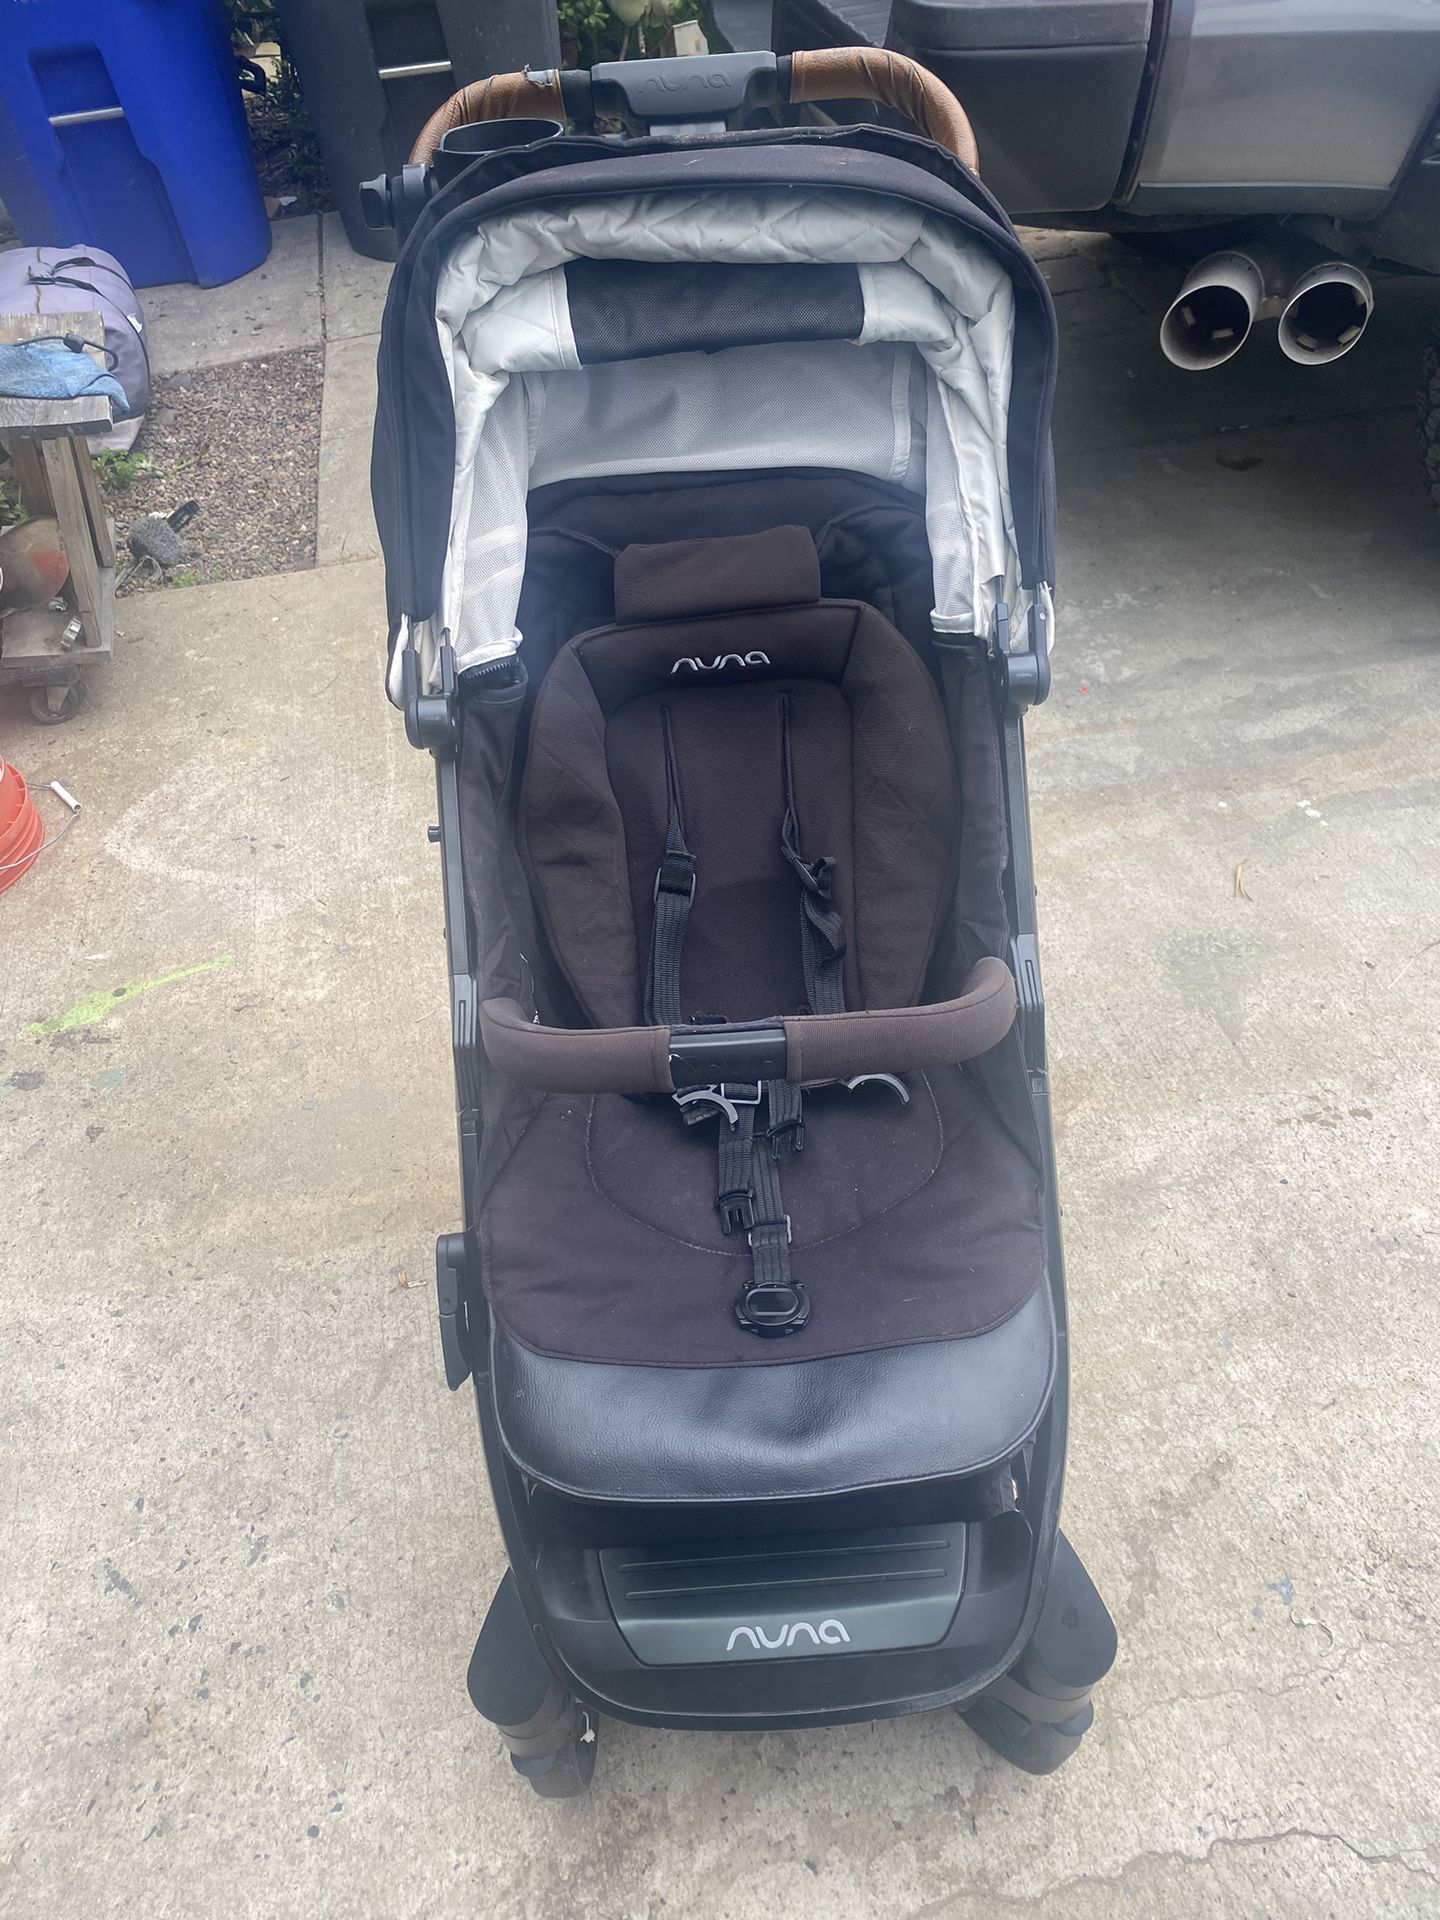 Nuva Stroller Car Seat And 2 Sets Of Bases 